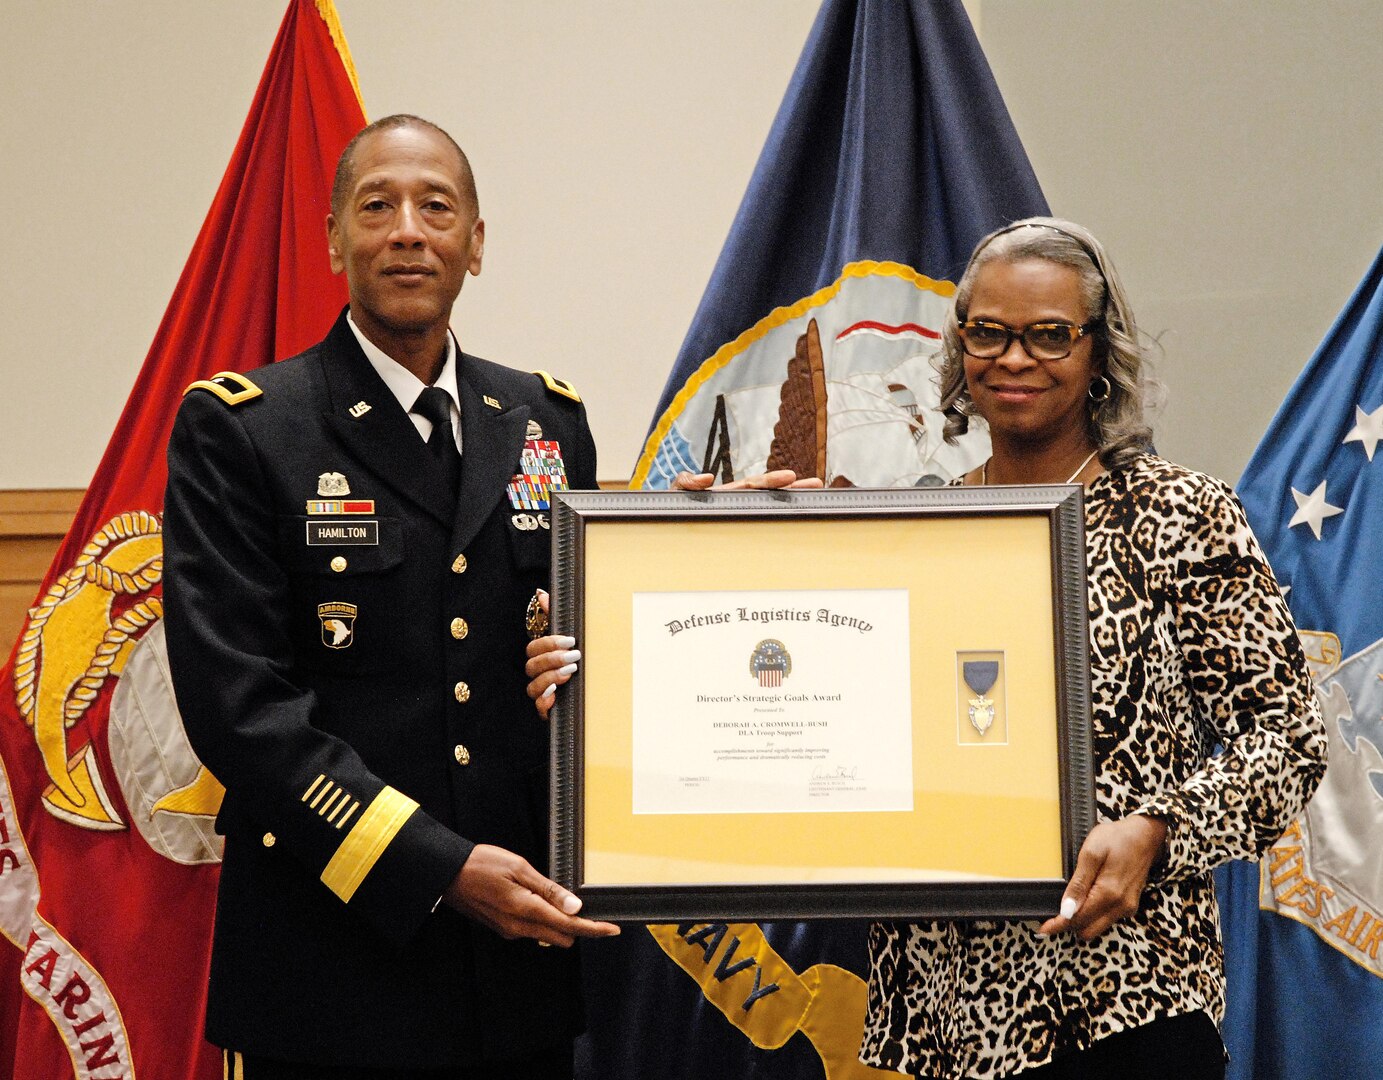 DLA Troop Support Commander Army Brig. Gen. Charles Hamilton recognizes Deborah Cromwell-Bush as the DLA Director’s Strategic Process Excellence Goal winner for the first quarter of fiscal 2017 during a ceremony in DLA Troop Support’s auditorium June 6. The award cited her numerous accomplishments, including her design of four centralized, user friendly databases used to track, categorize and manage contracting workloads within the Industrial Hardware supply chain.